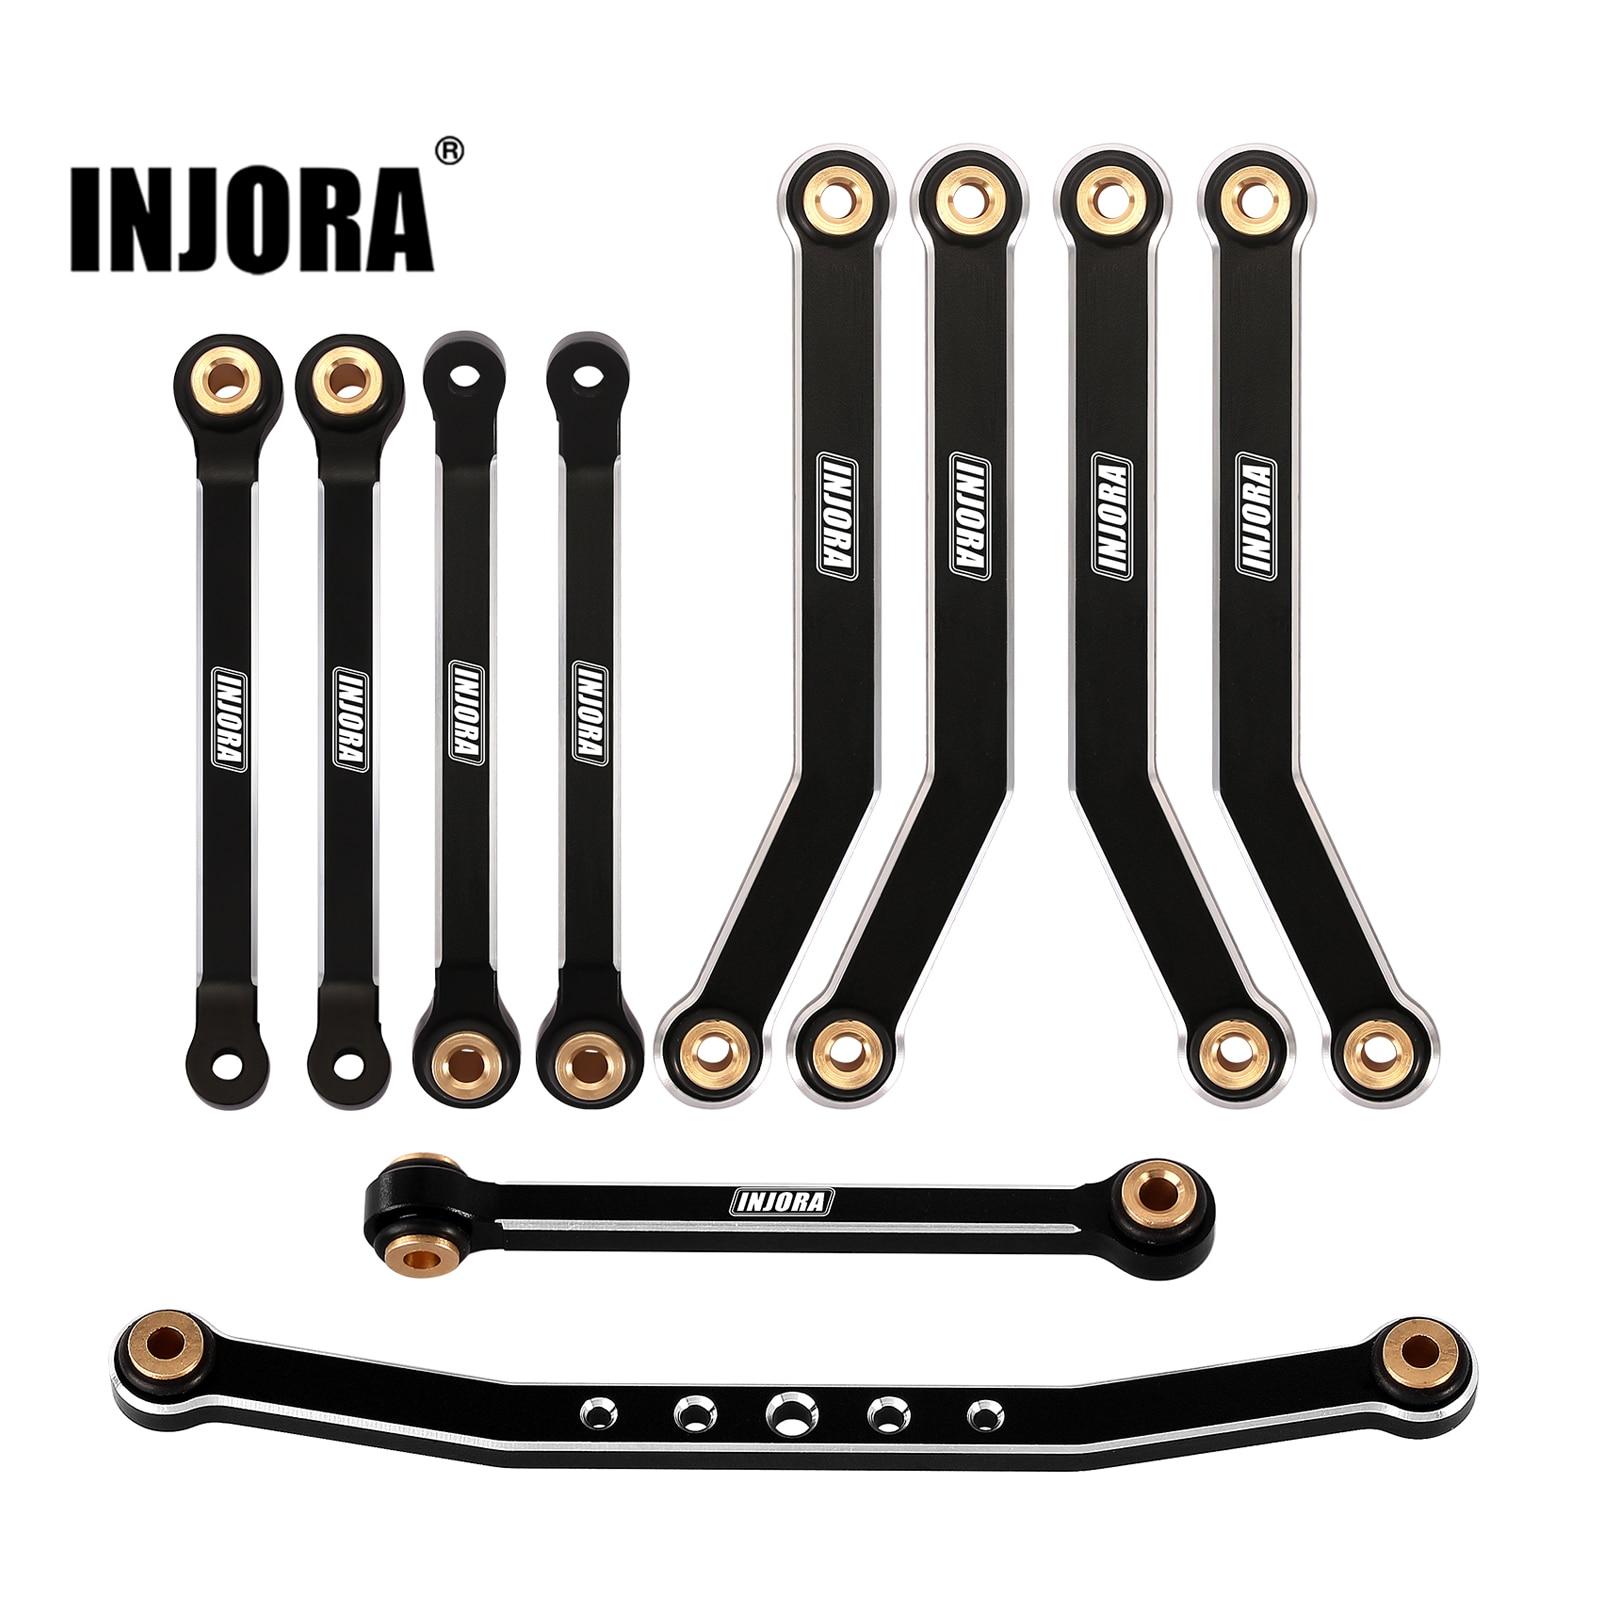 INJORA-CNC-Aluminium-High-Clearance-Chassis-Links-Steering-Links-Set-for-1-24-RC-Crawler-FMS.jpg